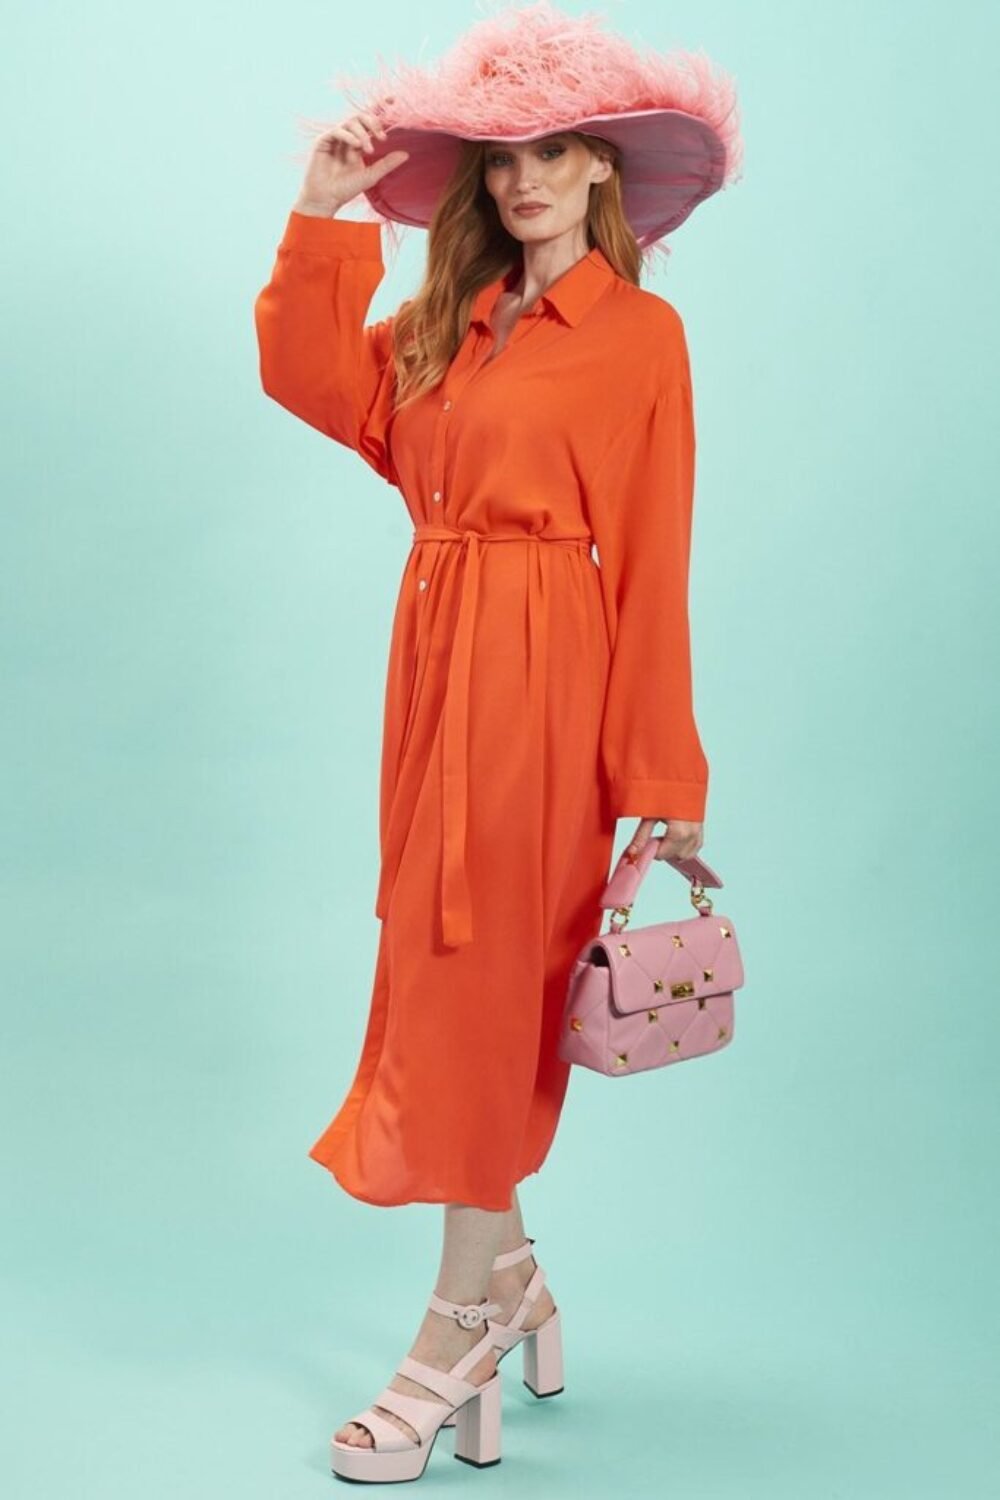 Shop Lux Orange Silk Blend Maxi Shirt Dress and women's luxury and designer clothes at www.lux-apparel.co.uk